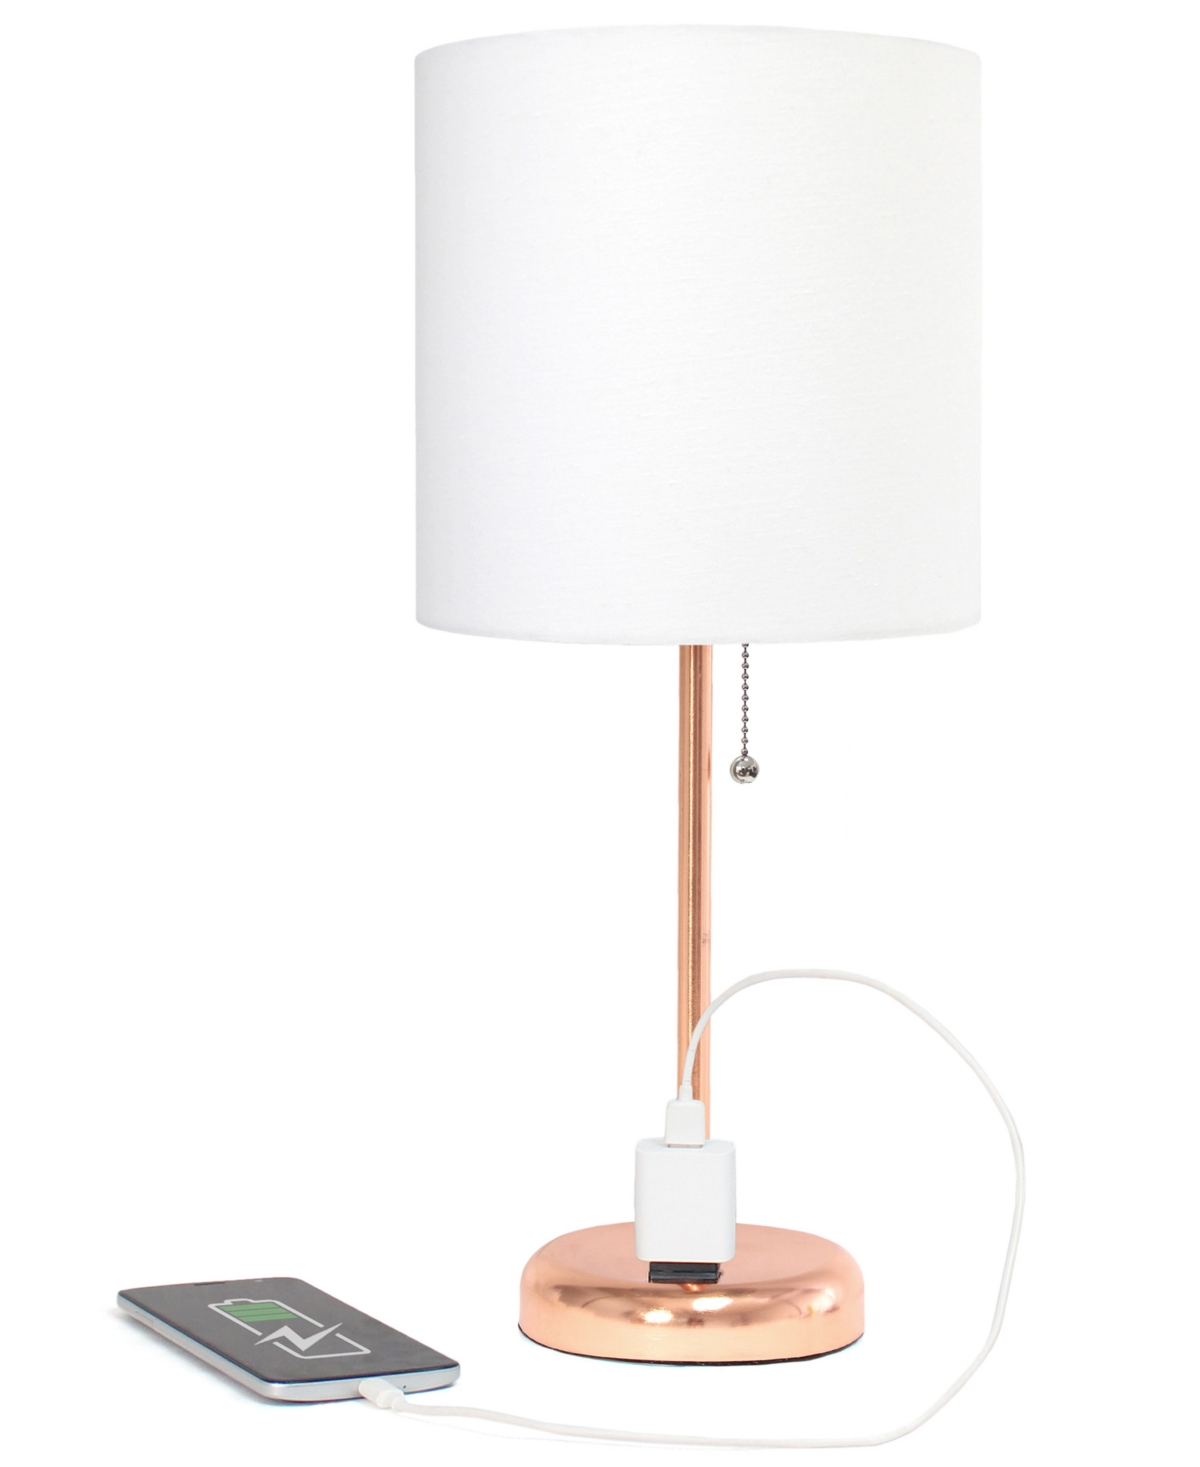 Shop Creekwood Home Oslo 19.5" Contemporary Bedside Power Outlet Base Standard Metal Table Desk Lamp In Multi